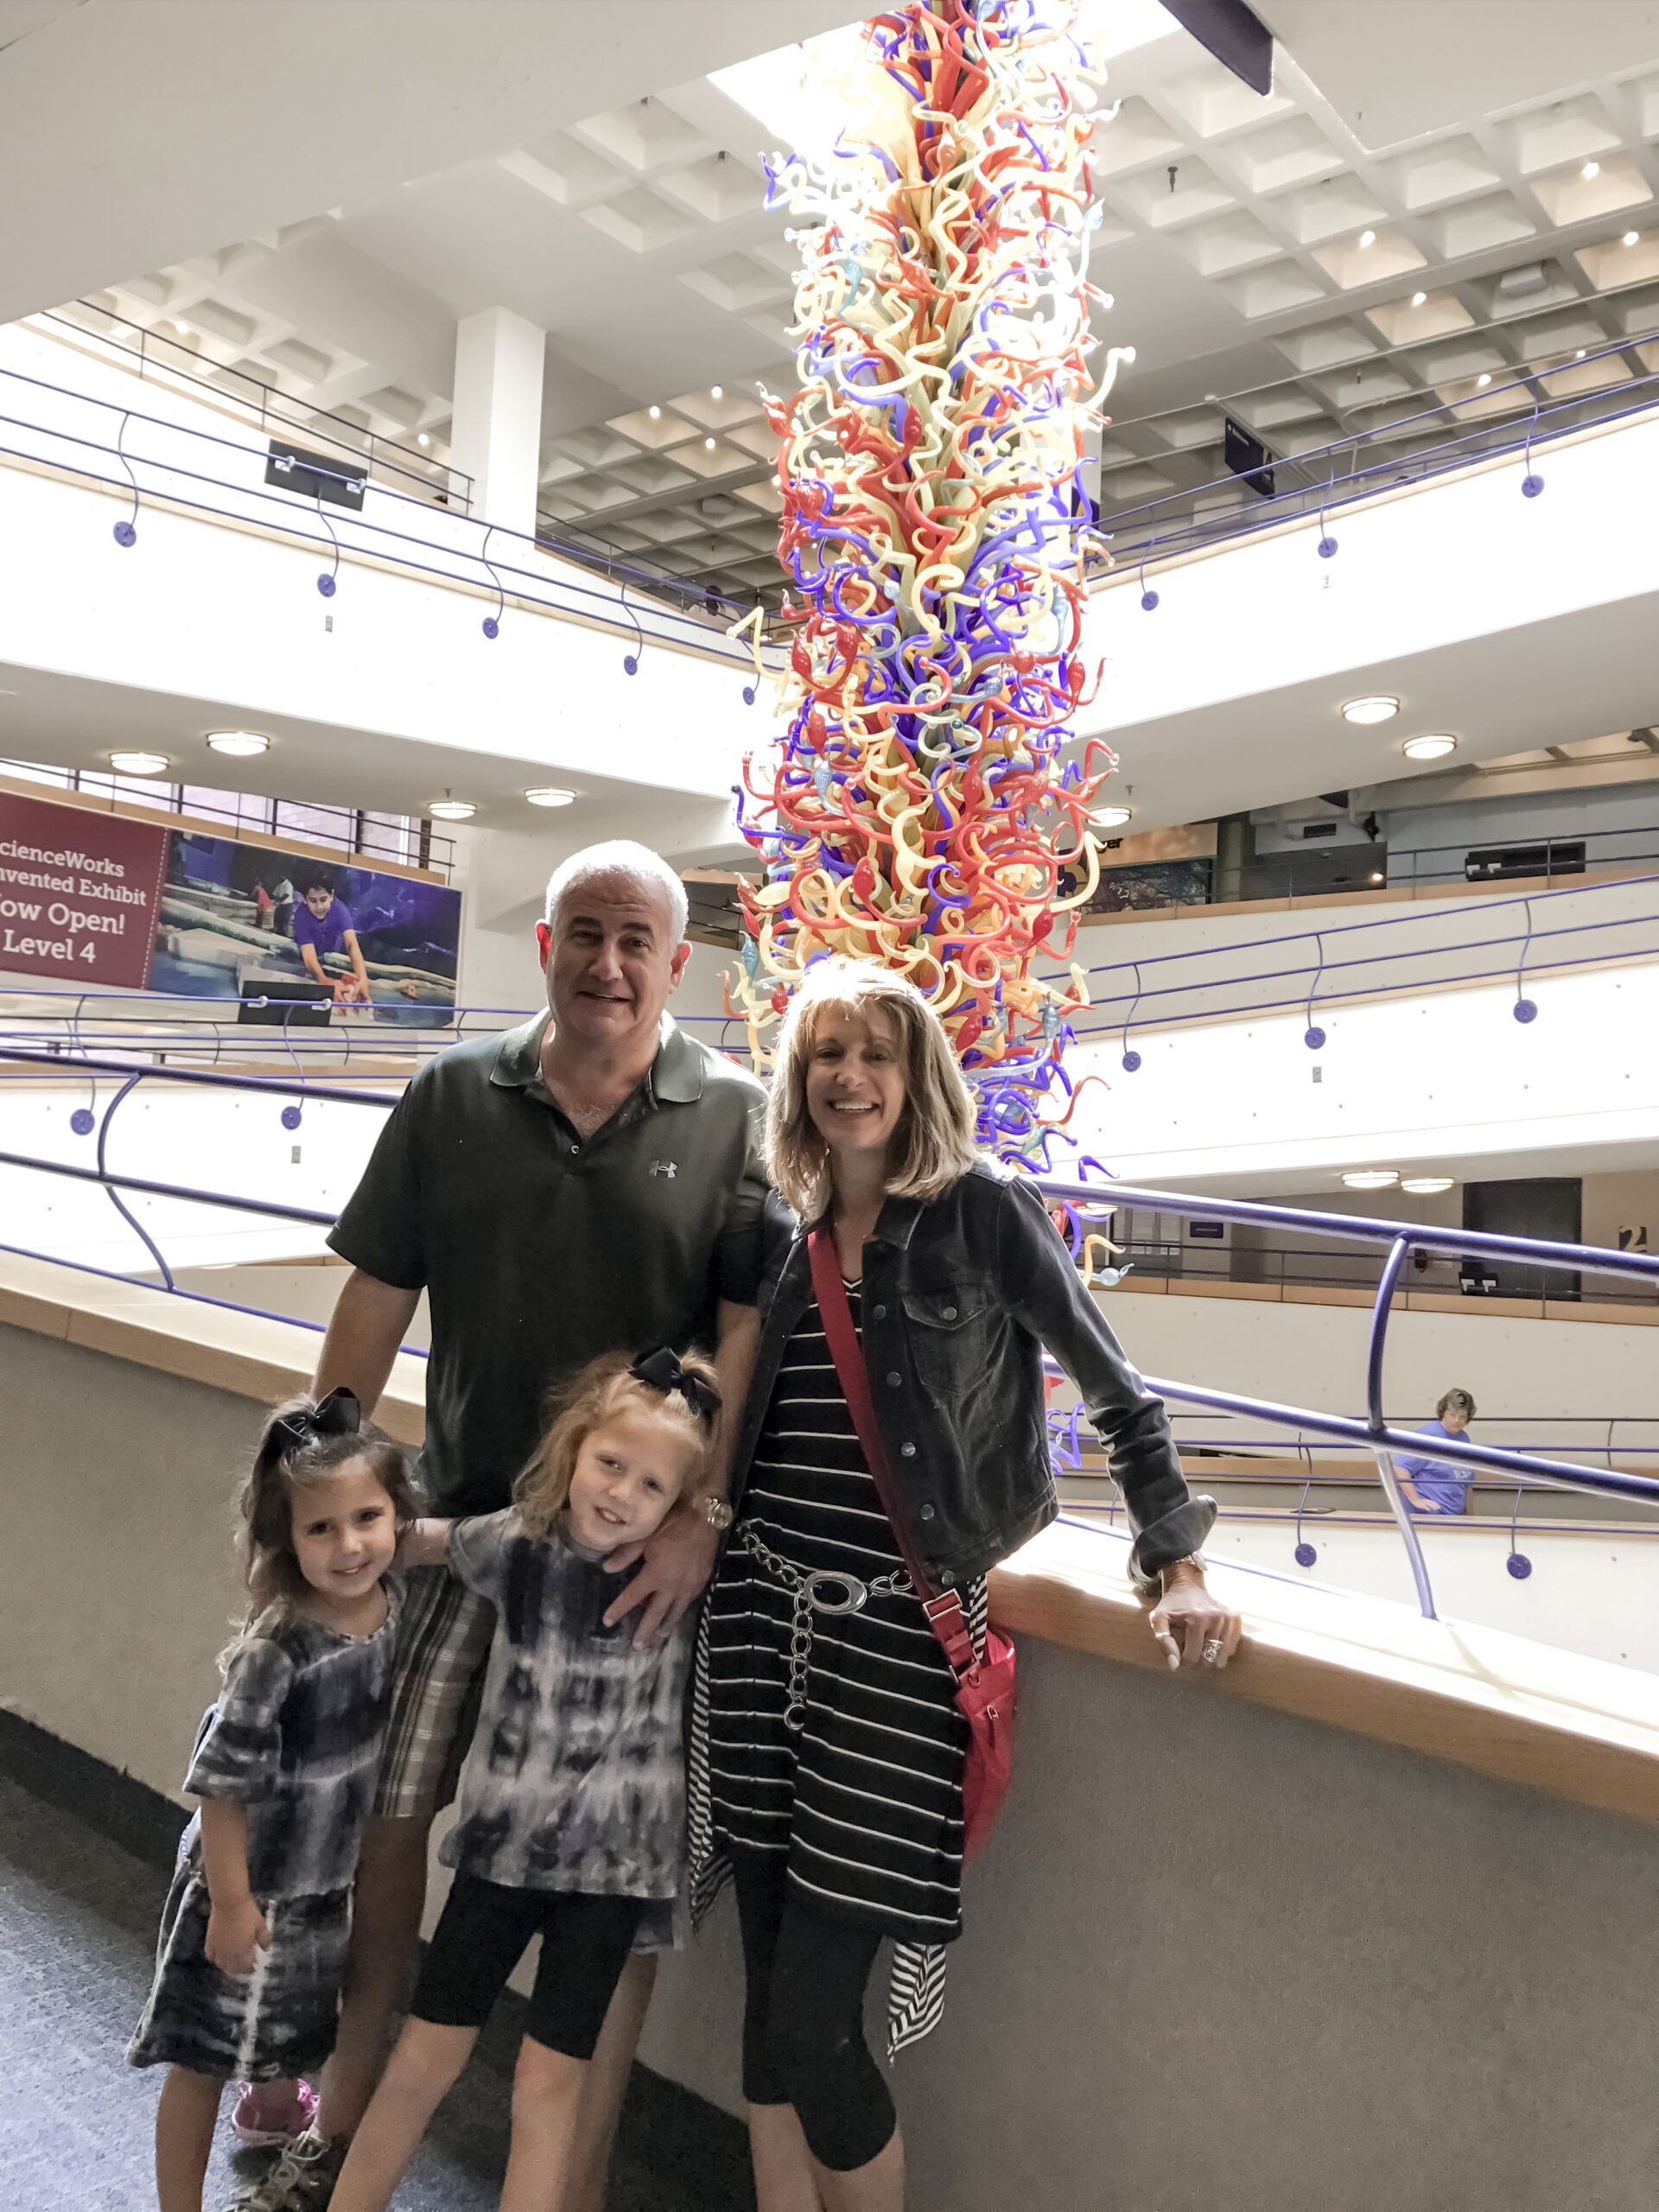 Fun Things to Do with Family in Indianapolis - Chihuly glass tower